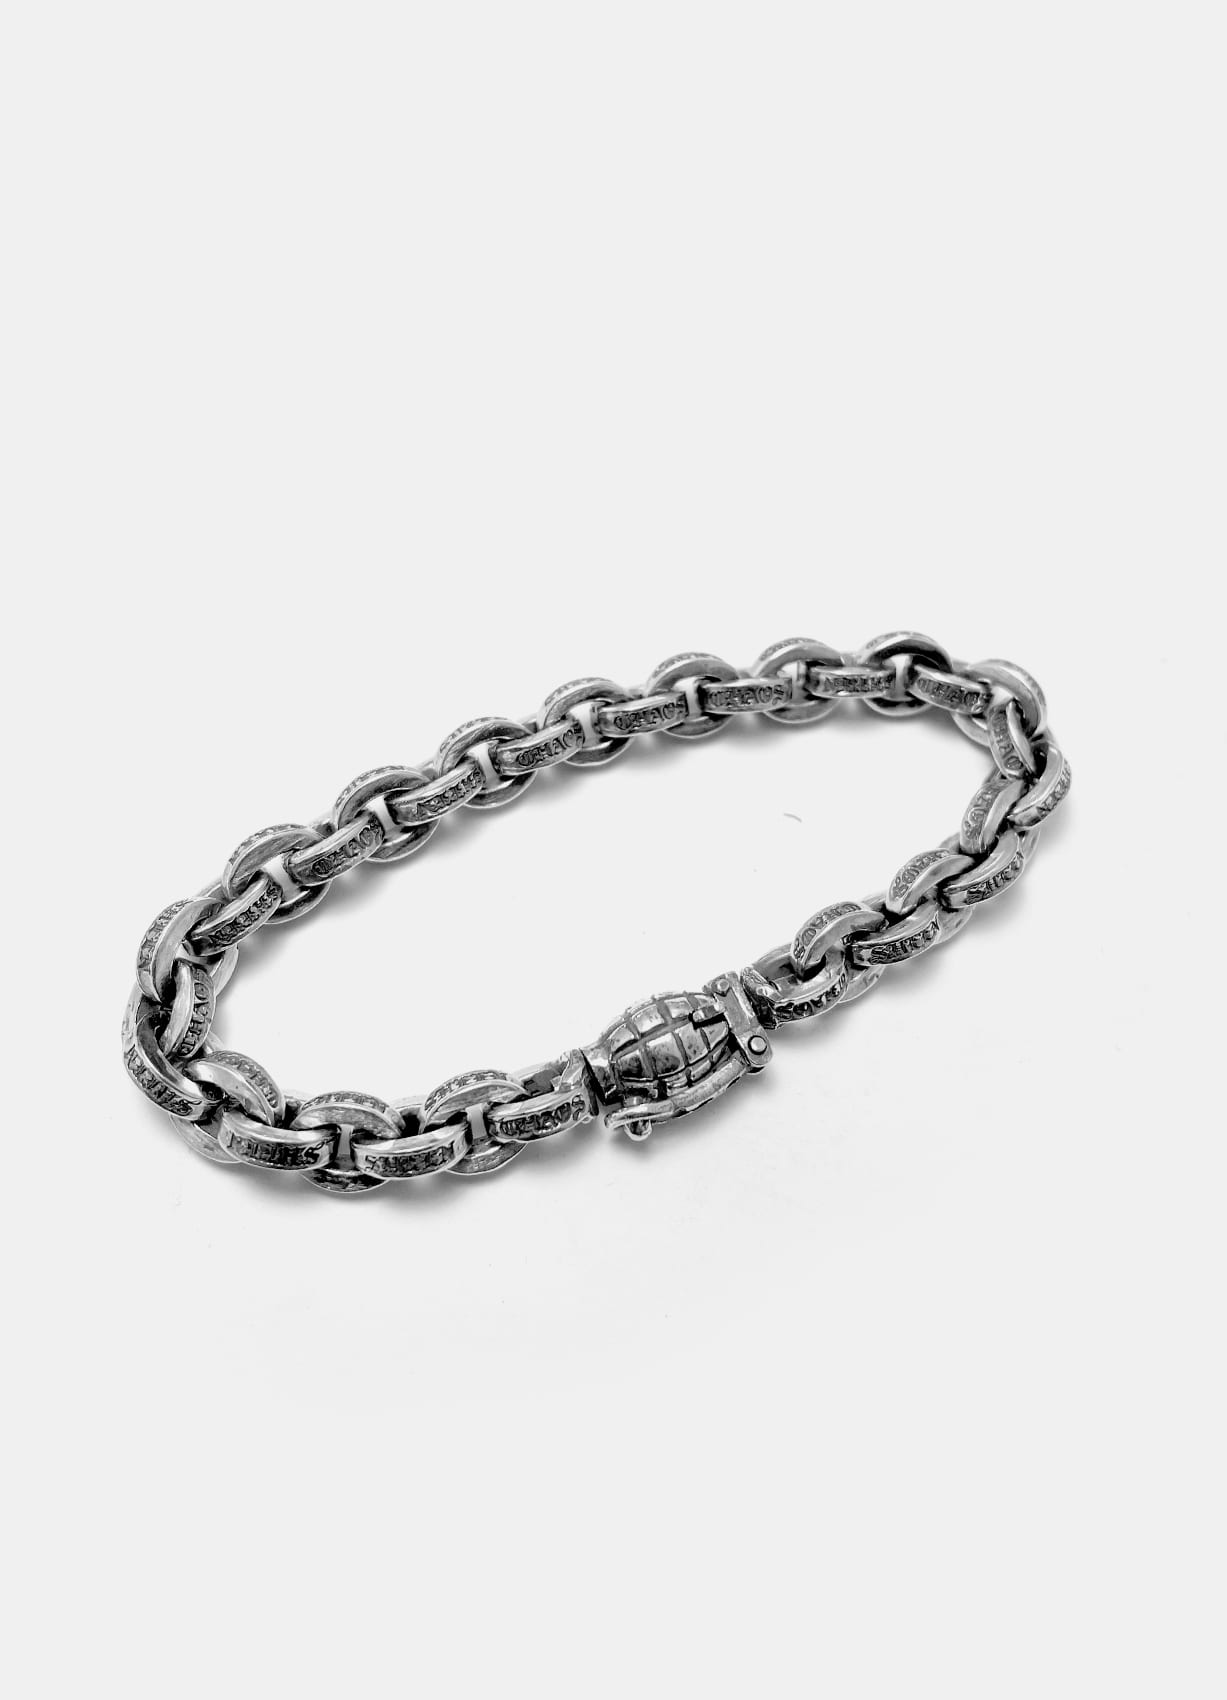 580 Chain Bracelet with grenade